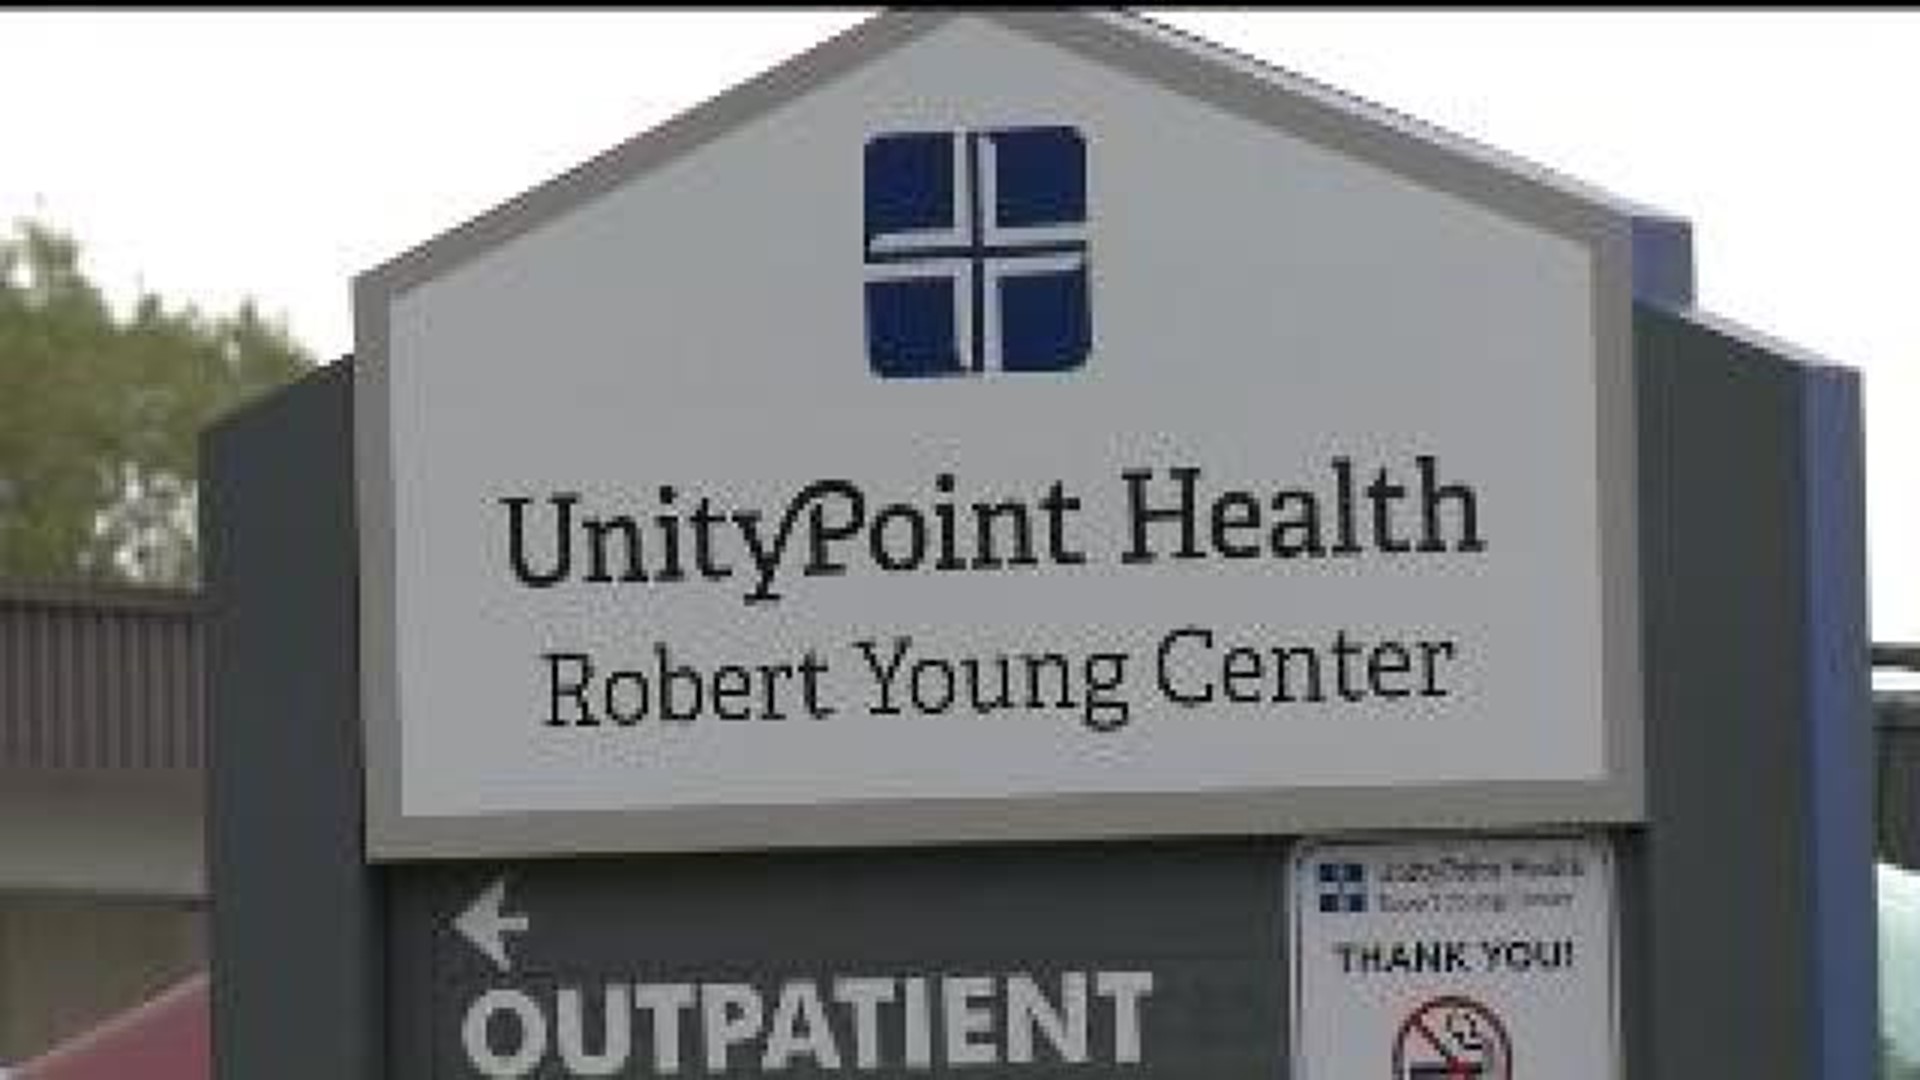 Mental Health funding could benefit local clinics